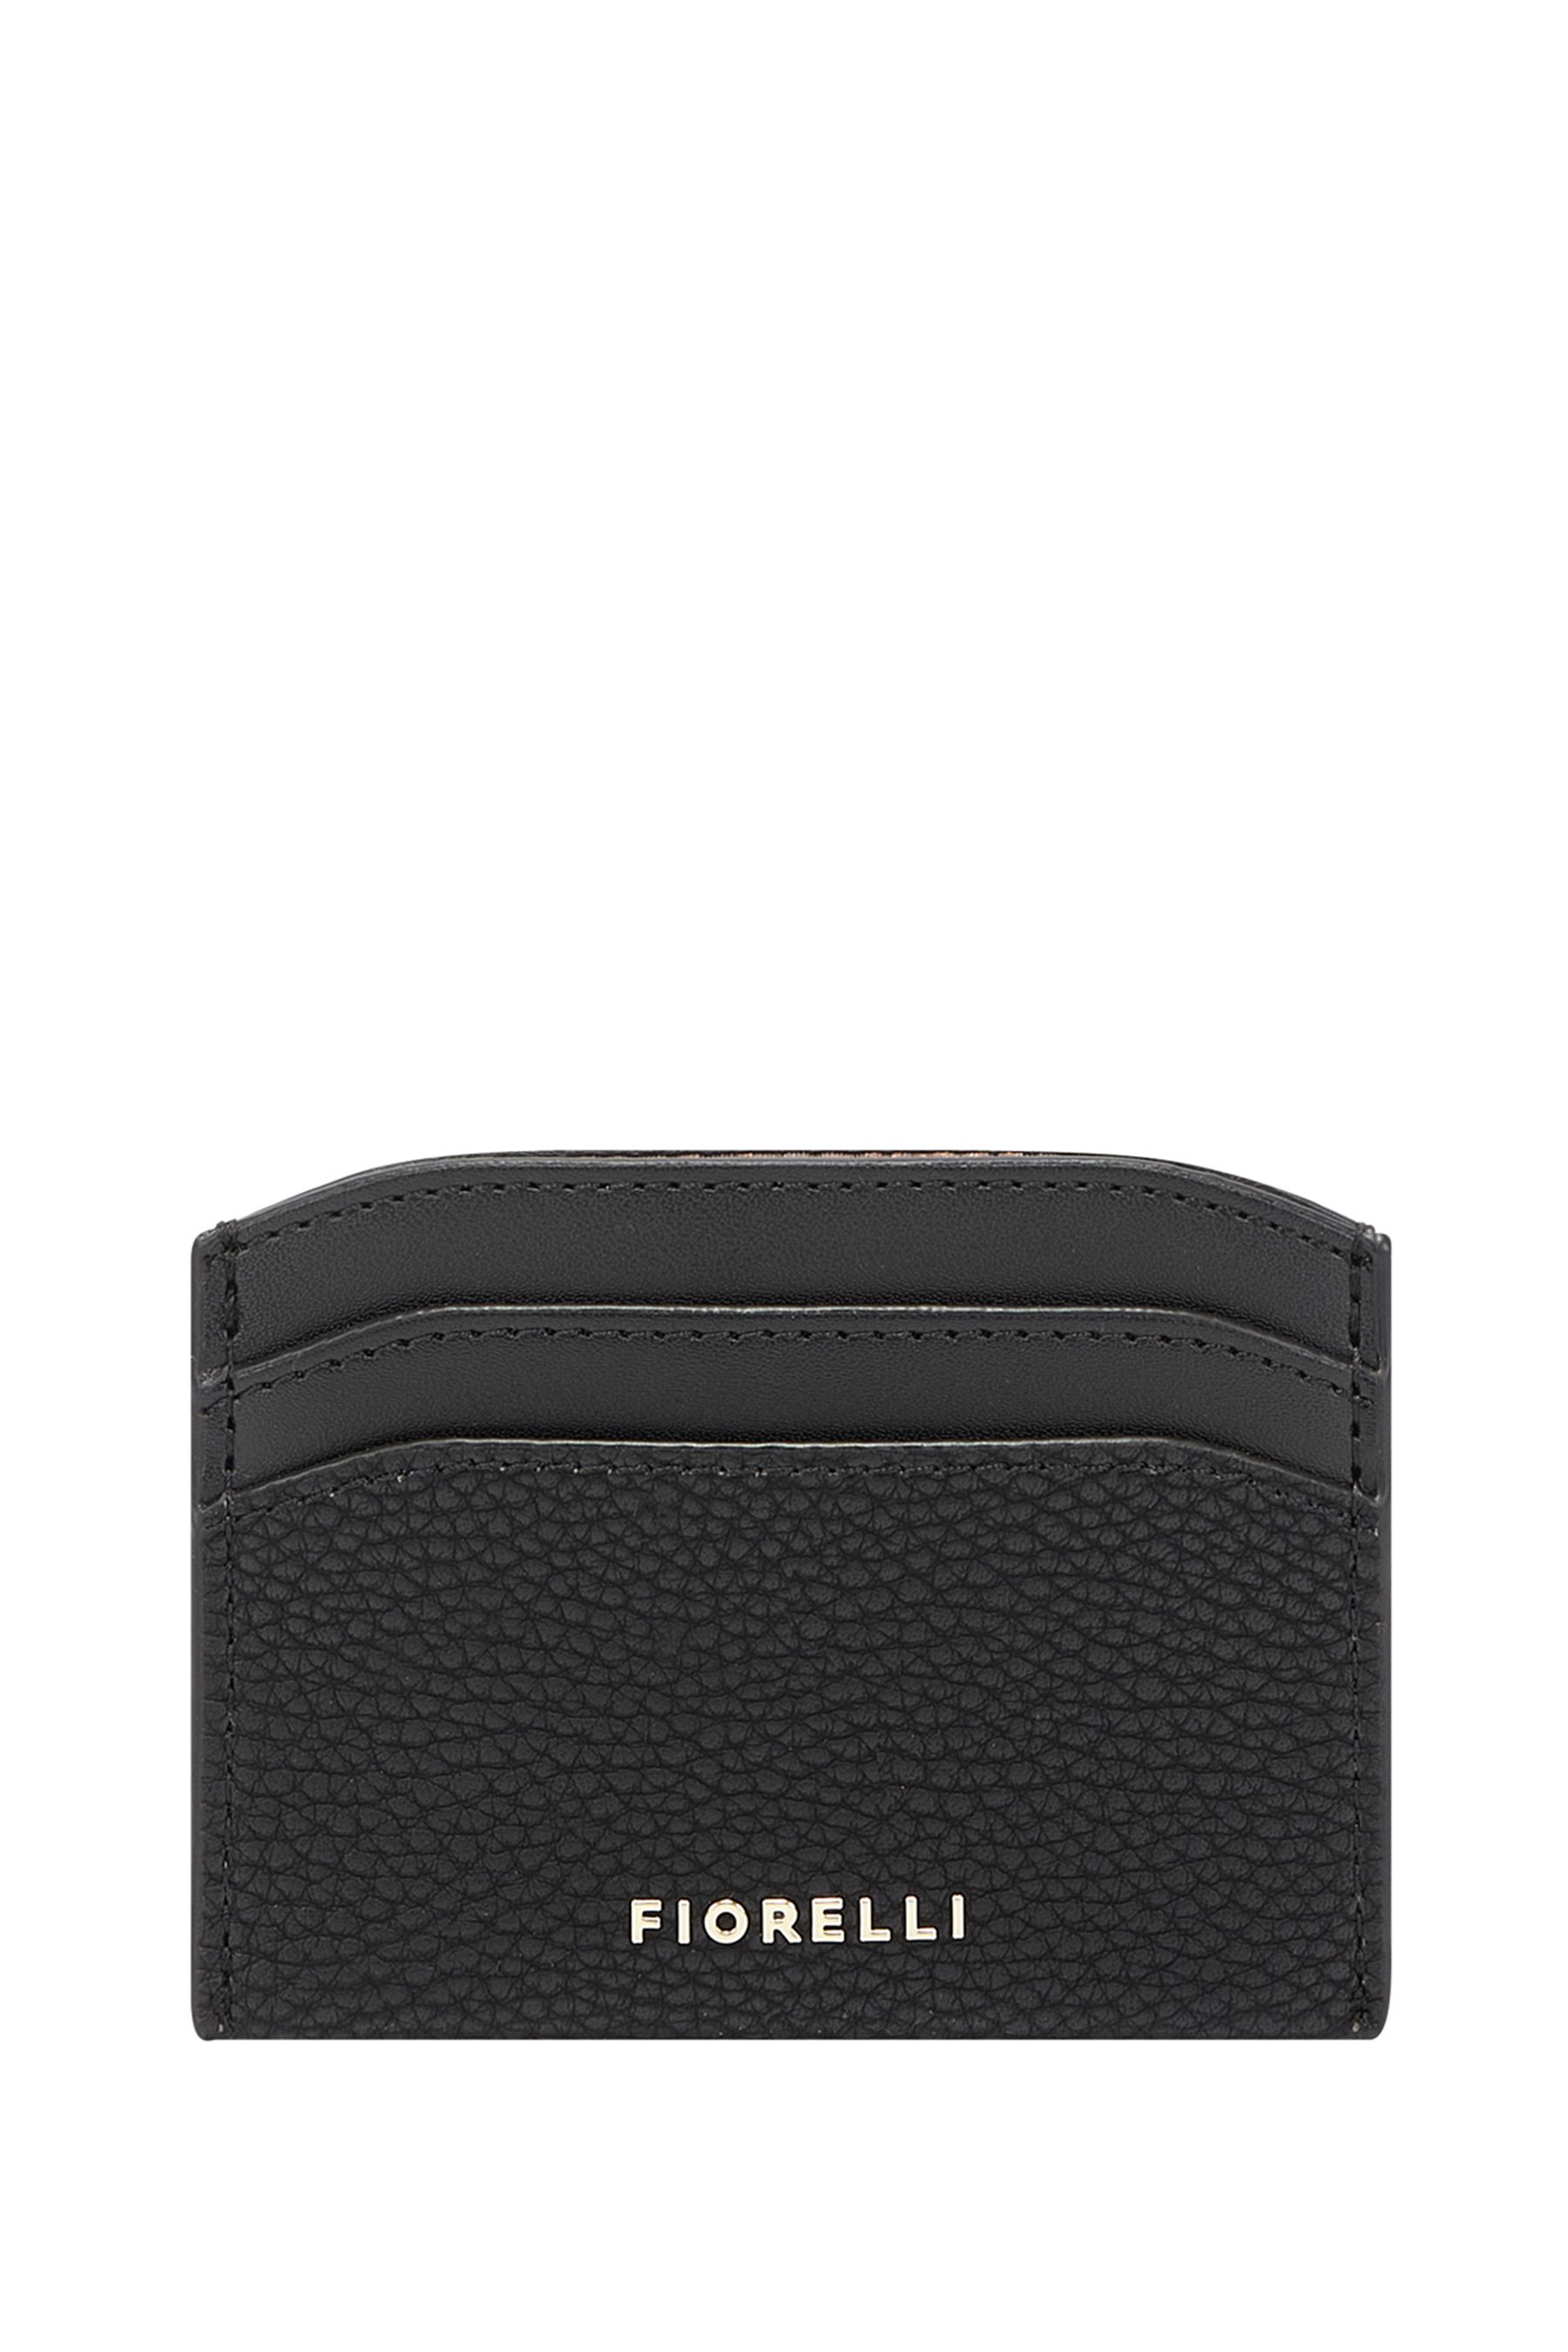 Buy Fiorelli Black Hillary Card Holder from the Next UK online shop